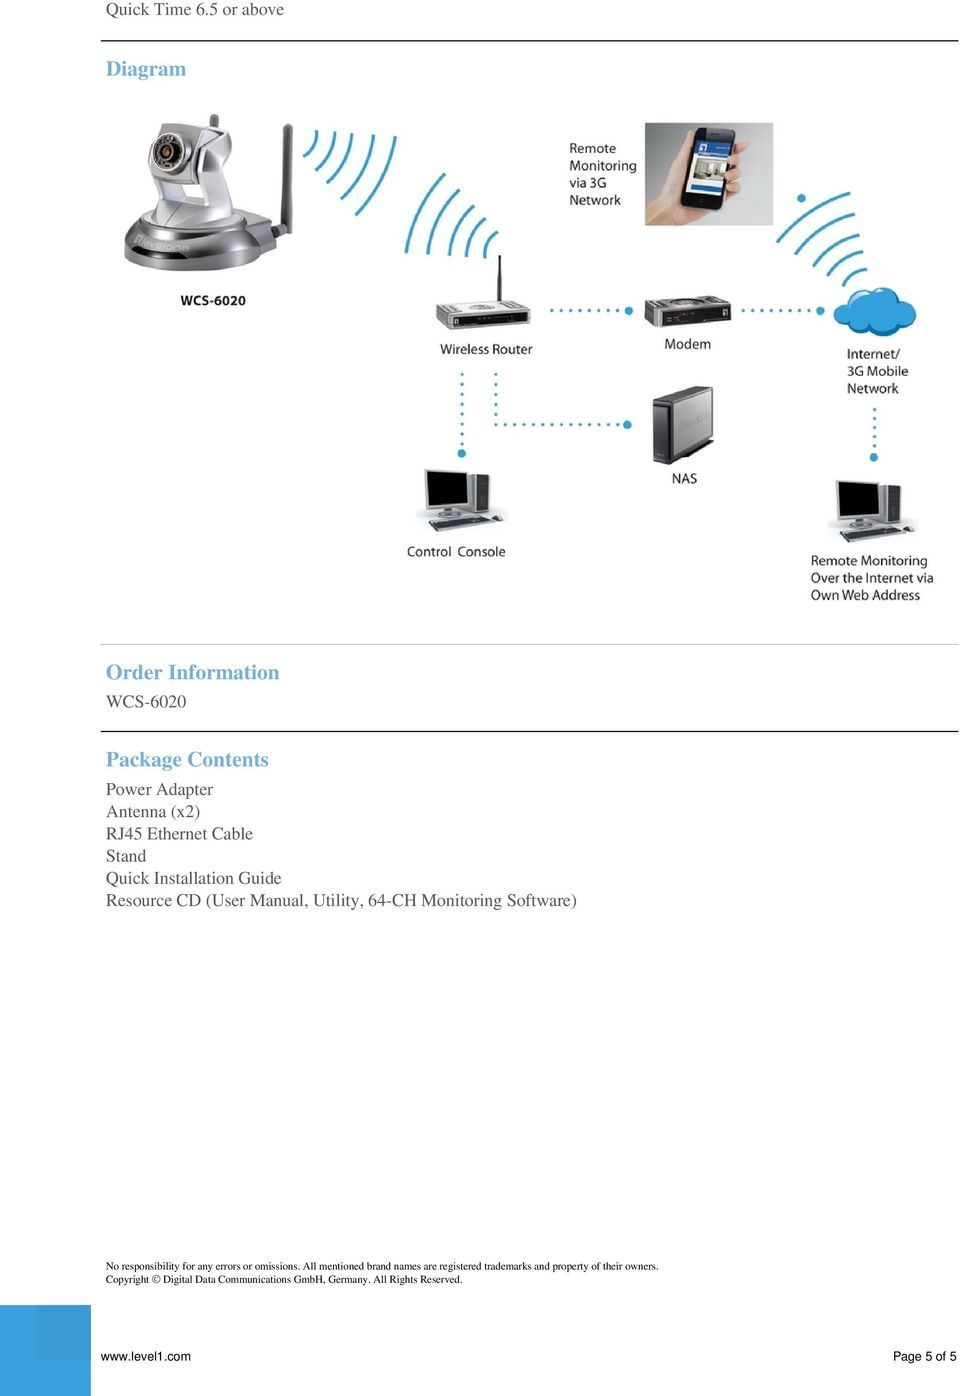 Quick Installation Guide Resource CD (User Manual, Utility, 64-CH Monitoring Software) No responsibility for any errors